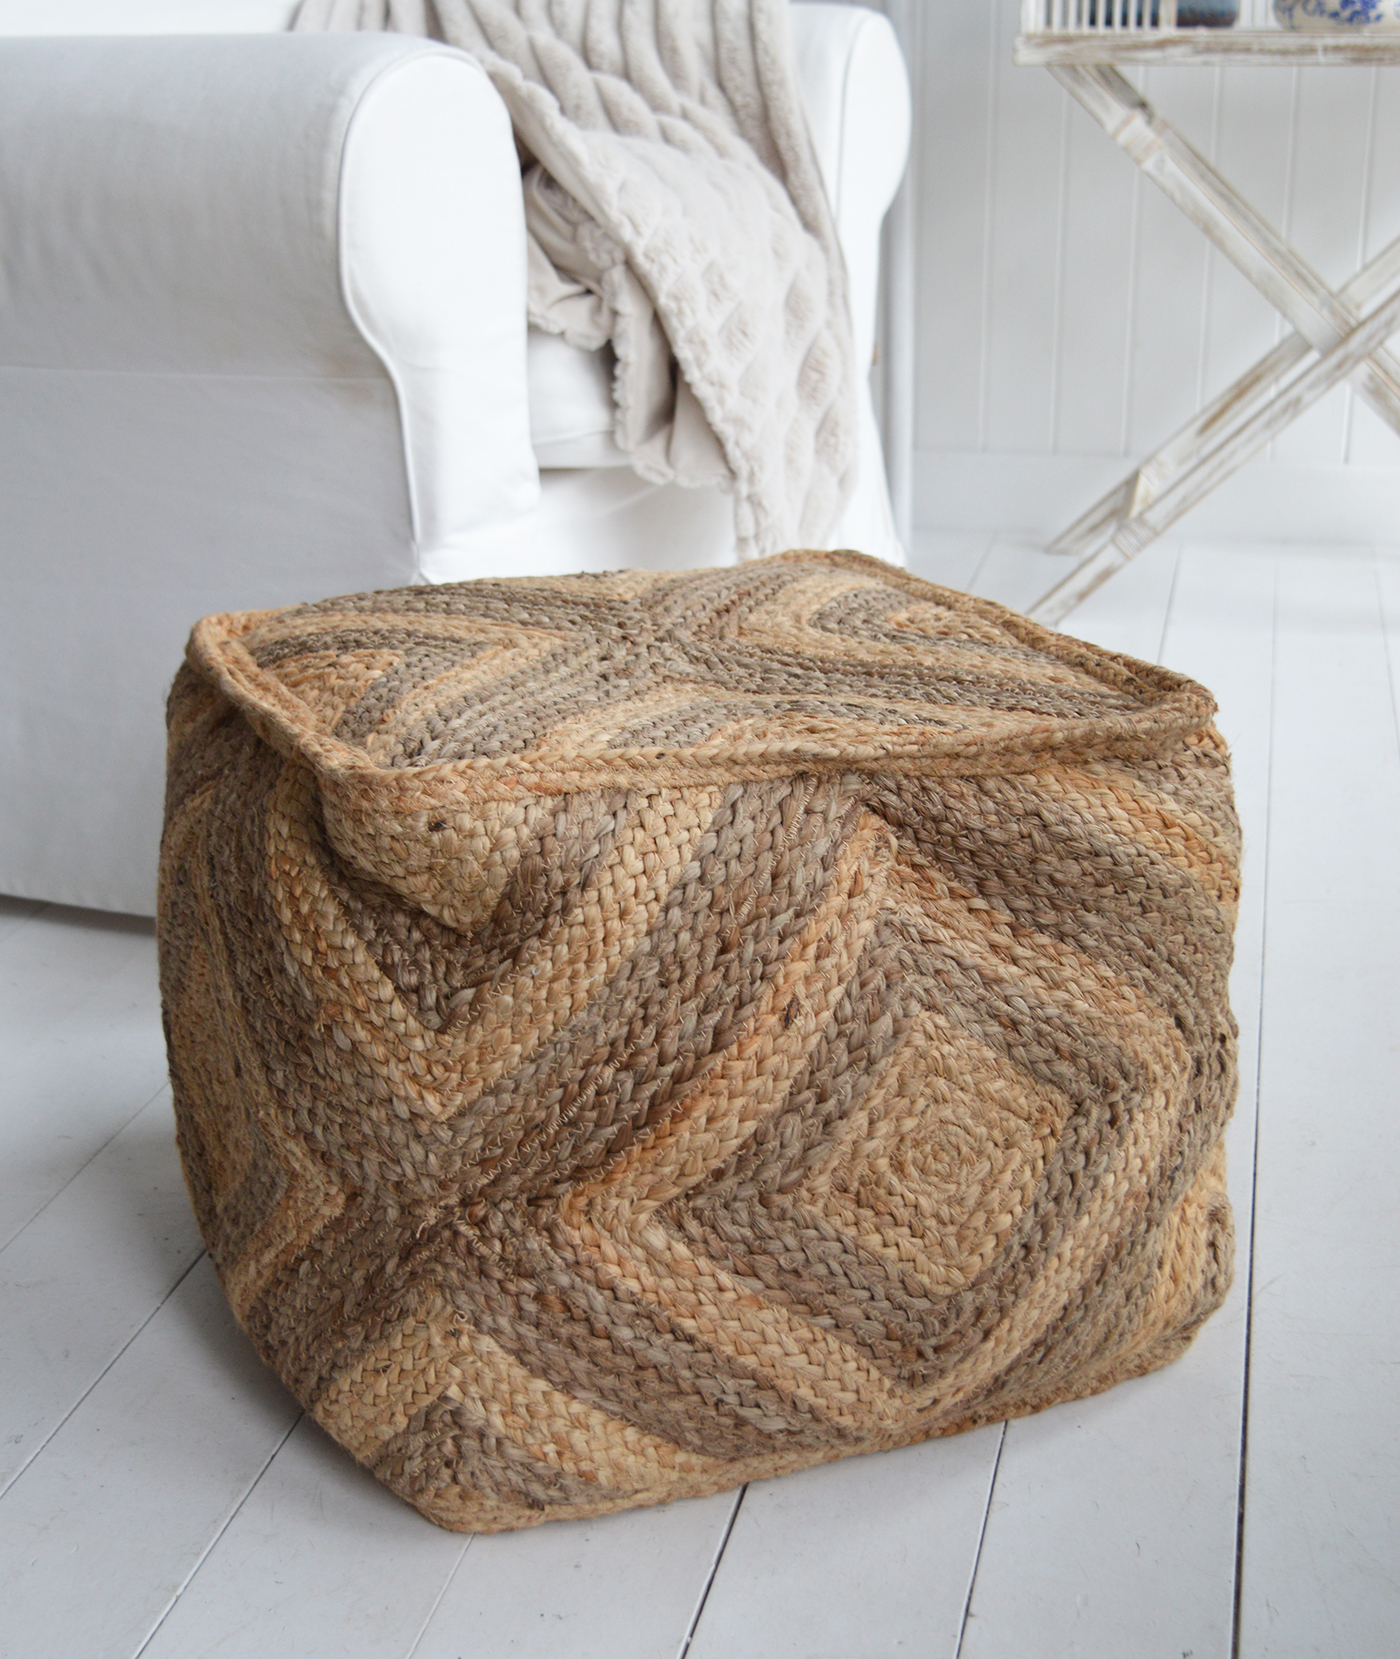 Benton Jute Ottoman / Pouffe  - Ideal to add warmth as a footrest, seating or table with natural material in a coastal or New England living room